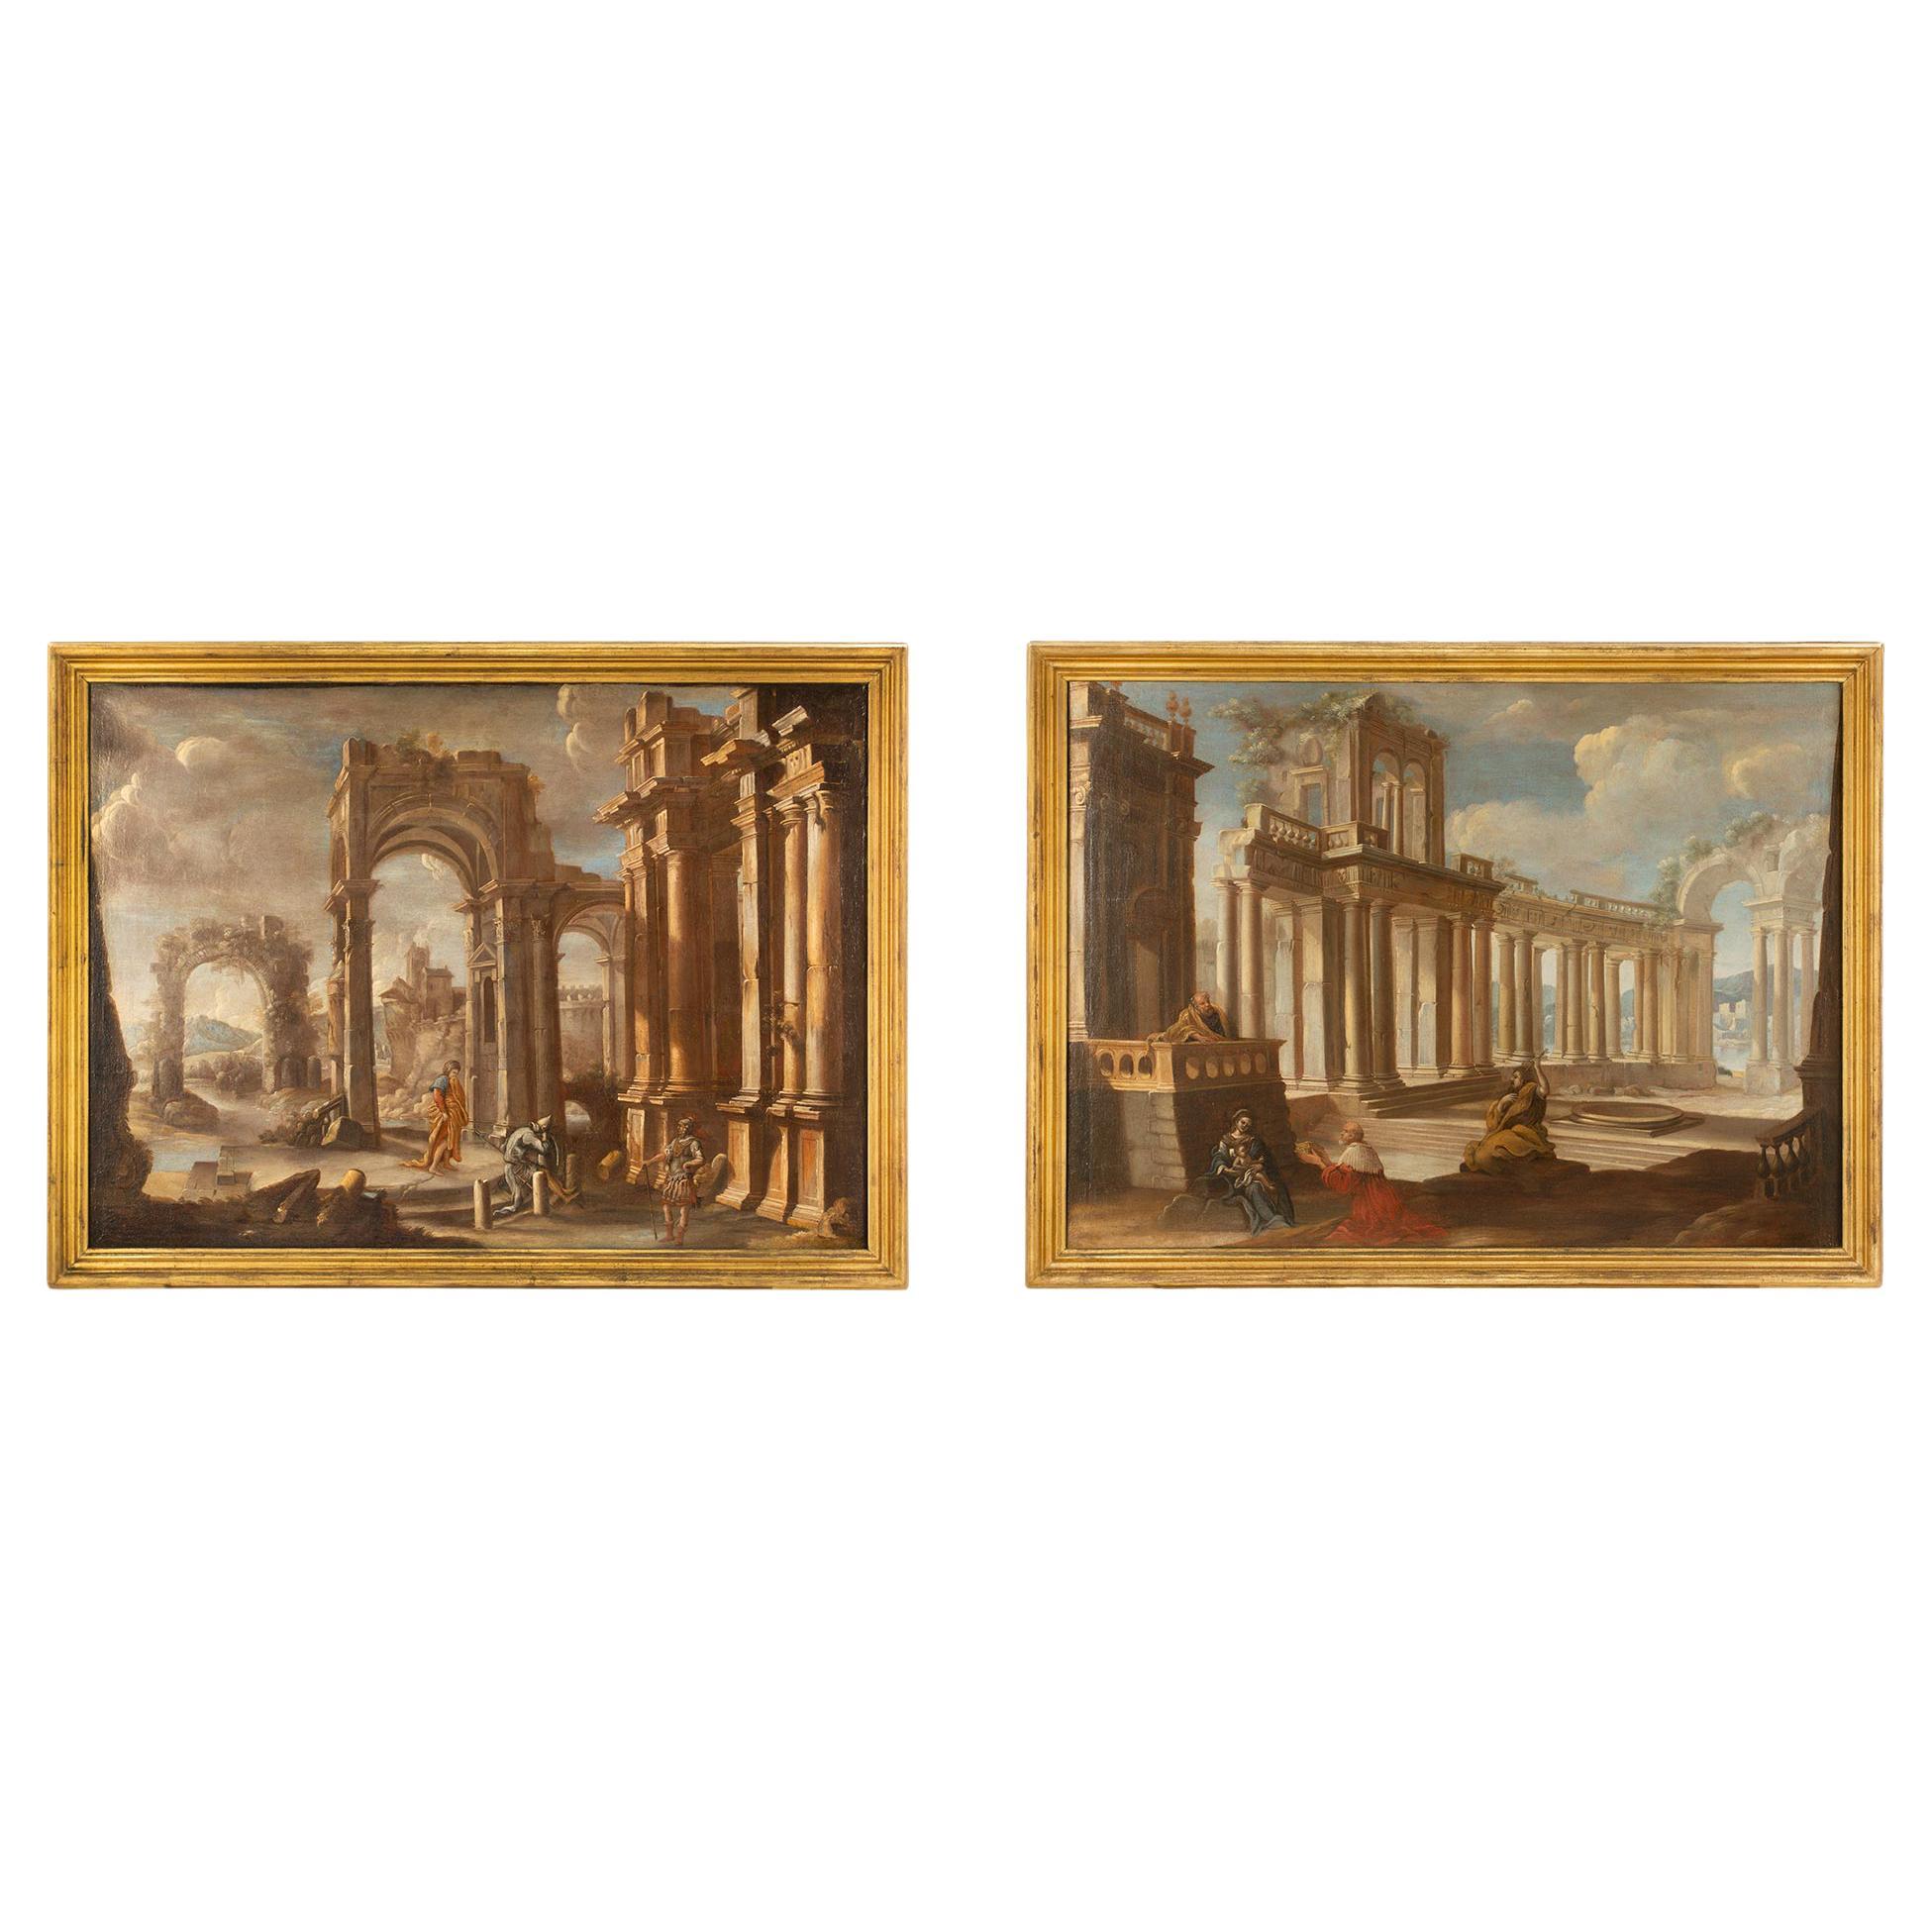 Pair of Italian Mid-18th Century Old Master Oil on Canvas Paintings of Ruins